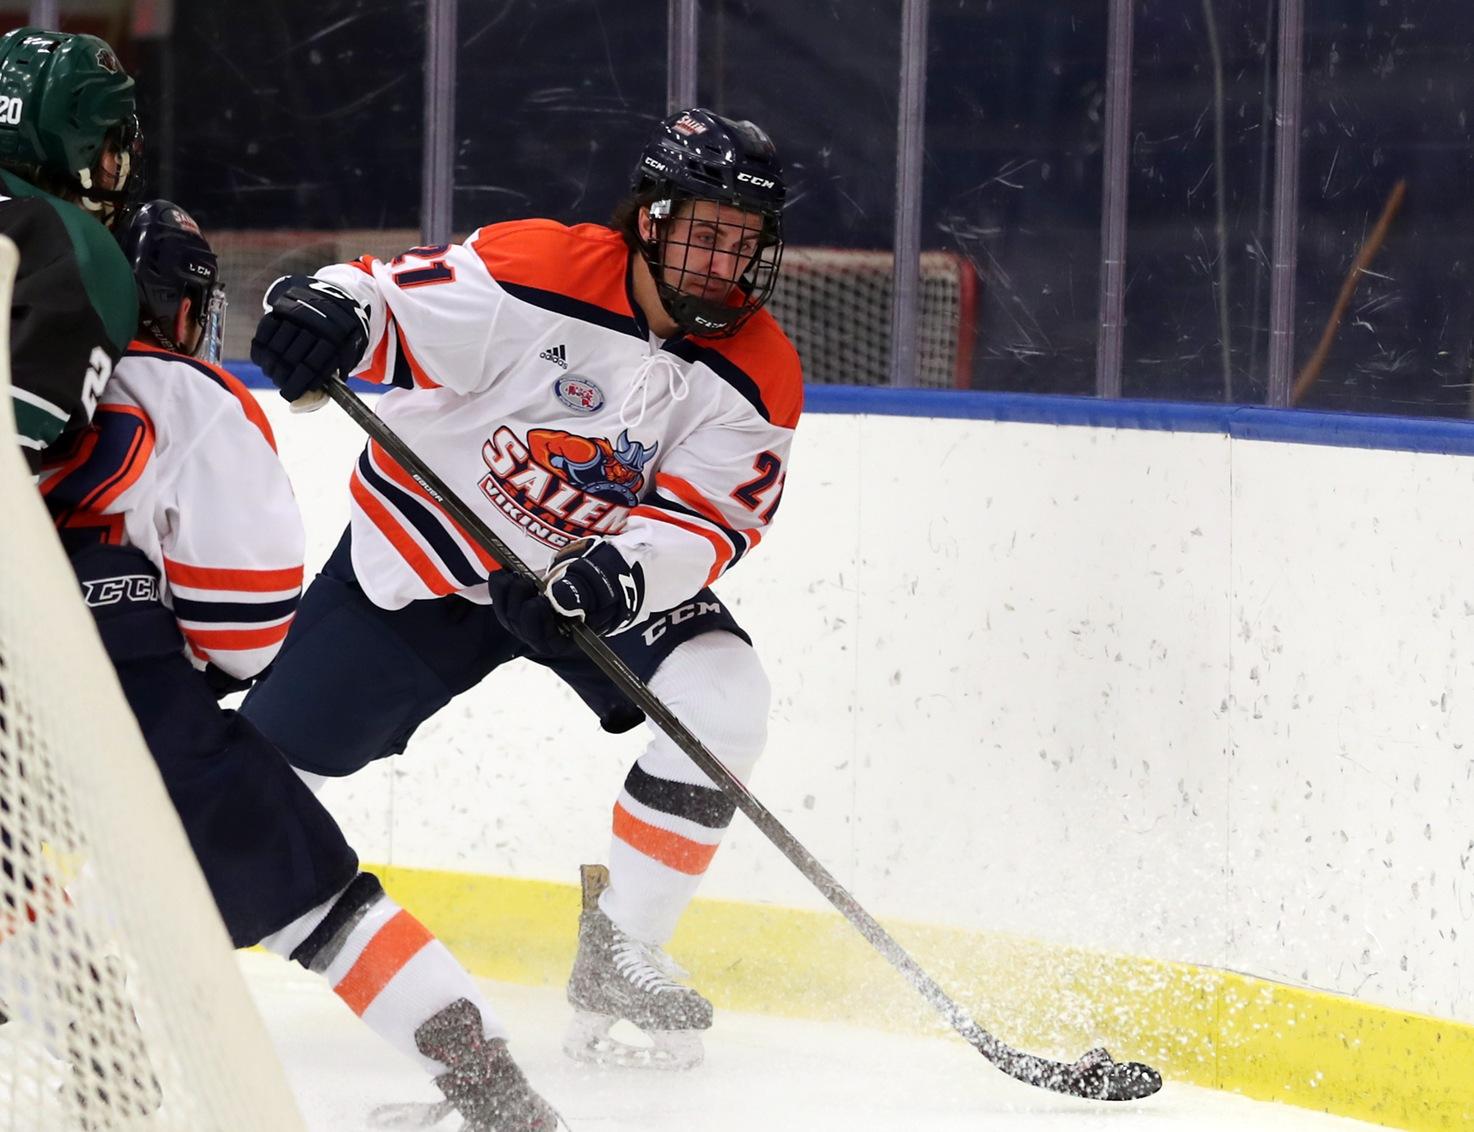 Salem State's Postseason Run Ends With 3-0 Loss to Plymouth State in MASCAC Final